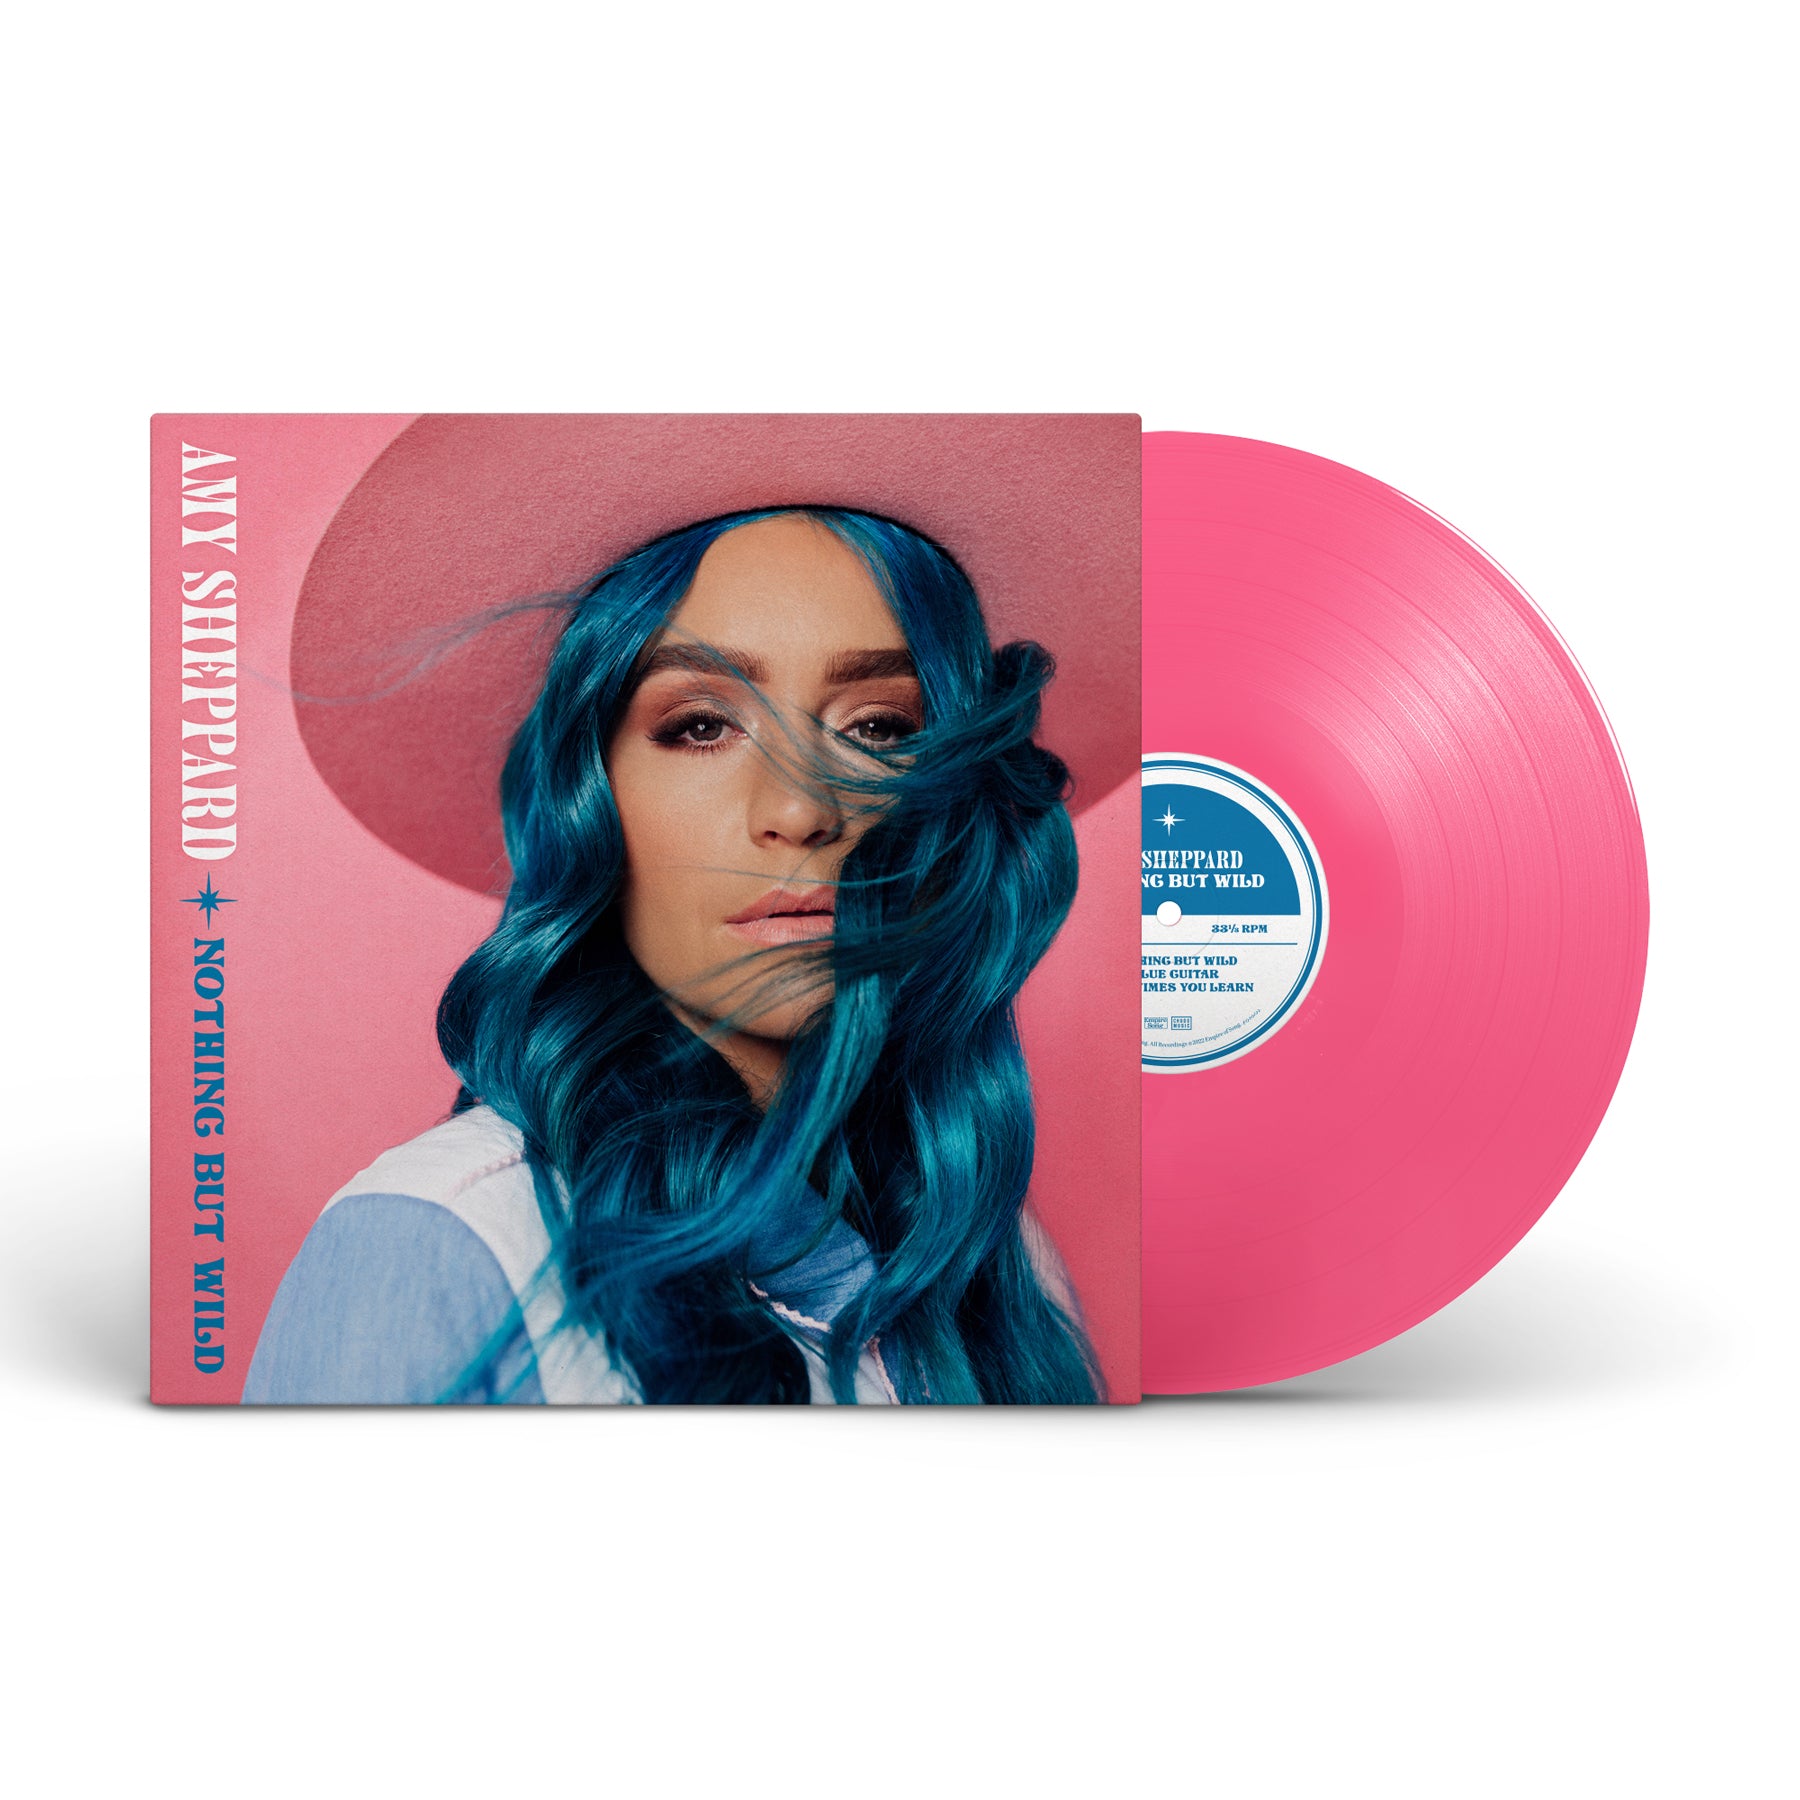 The cover of Amy Sheppard's new EP called Nothing But Wild. An image of a pink vinyl record is half sticking out of the right hand side. Amy is wearing a blue and white cowboy shirt with her long blue hair and a pink cowboy hat.